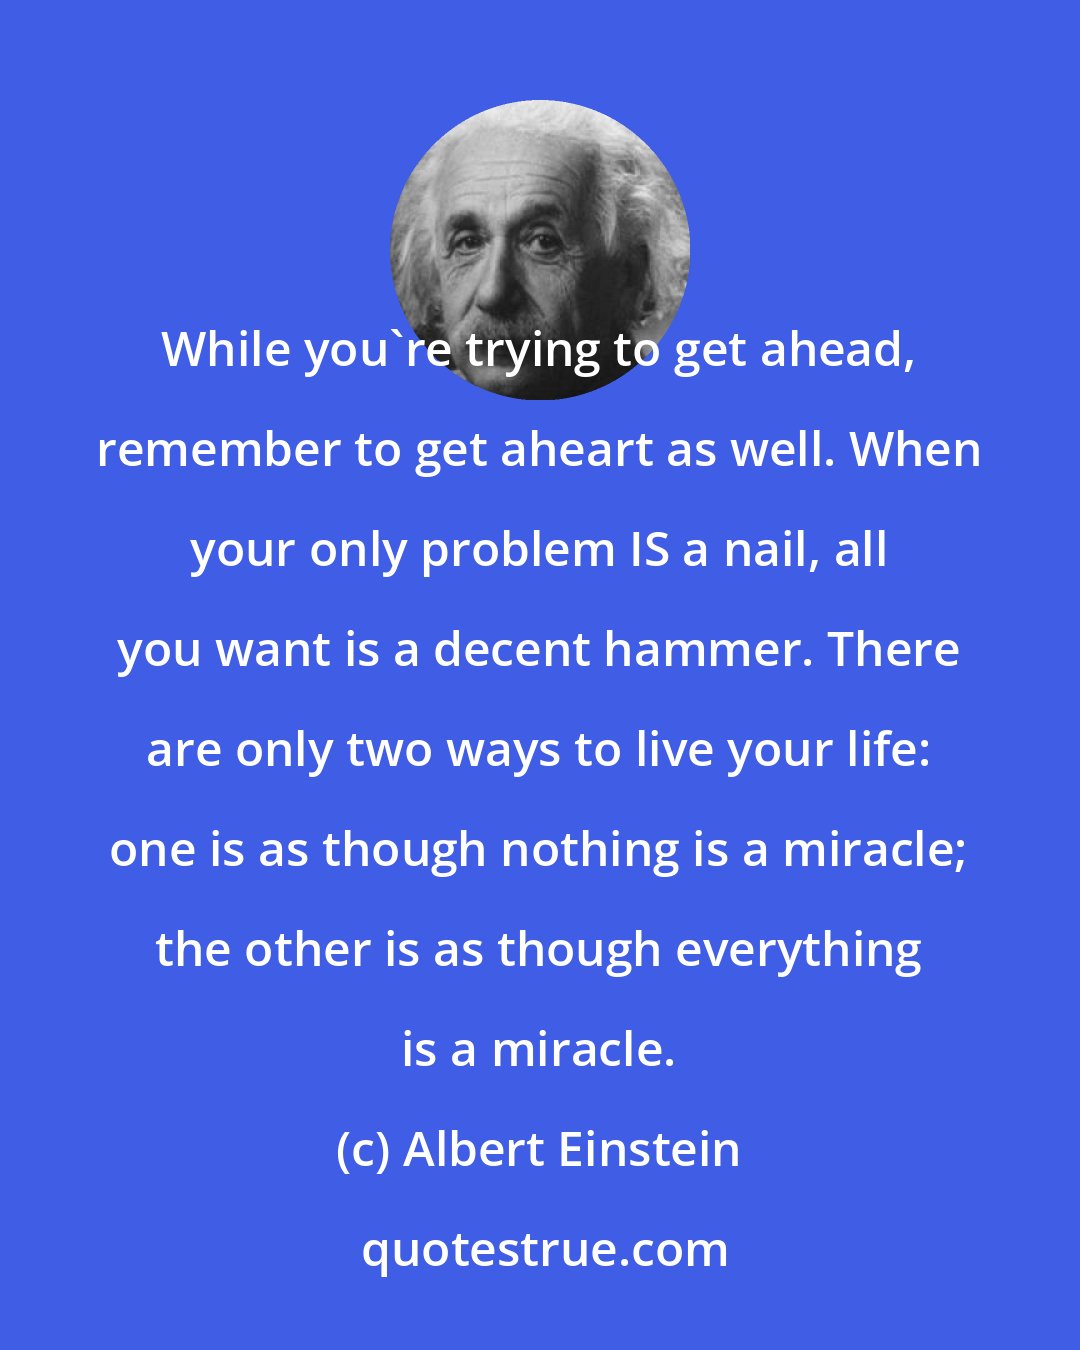 Albert Einstein: While you're trying to get ahead, remember to get aheart as well. When your only problem IS a nail, all you want is a decent hammer. There are only two ways to live your life: one is as though nothing is a miracle; the other is as though everything is a miracle.